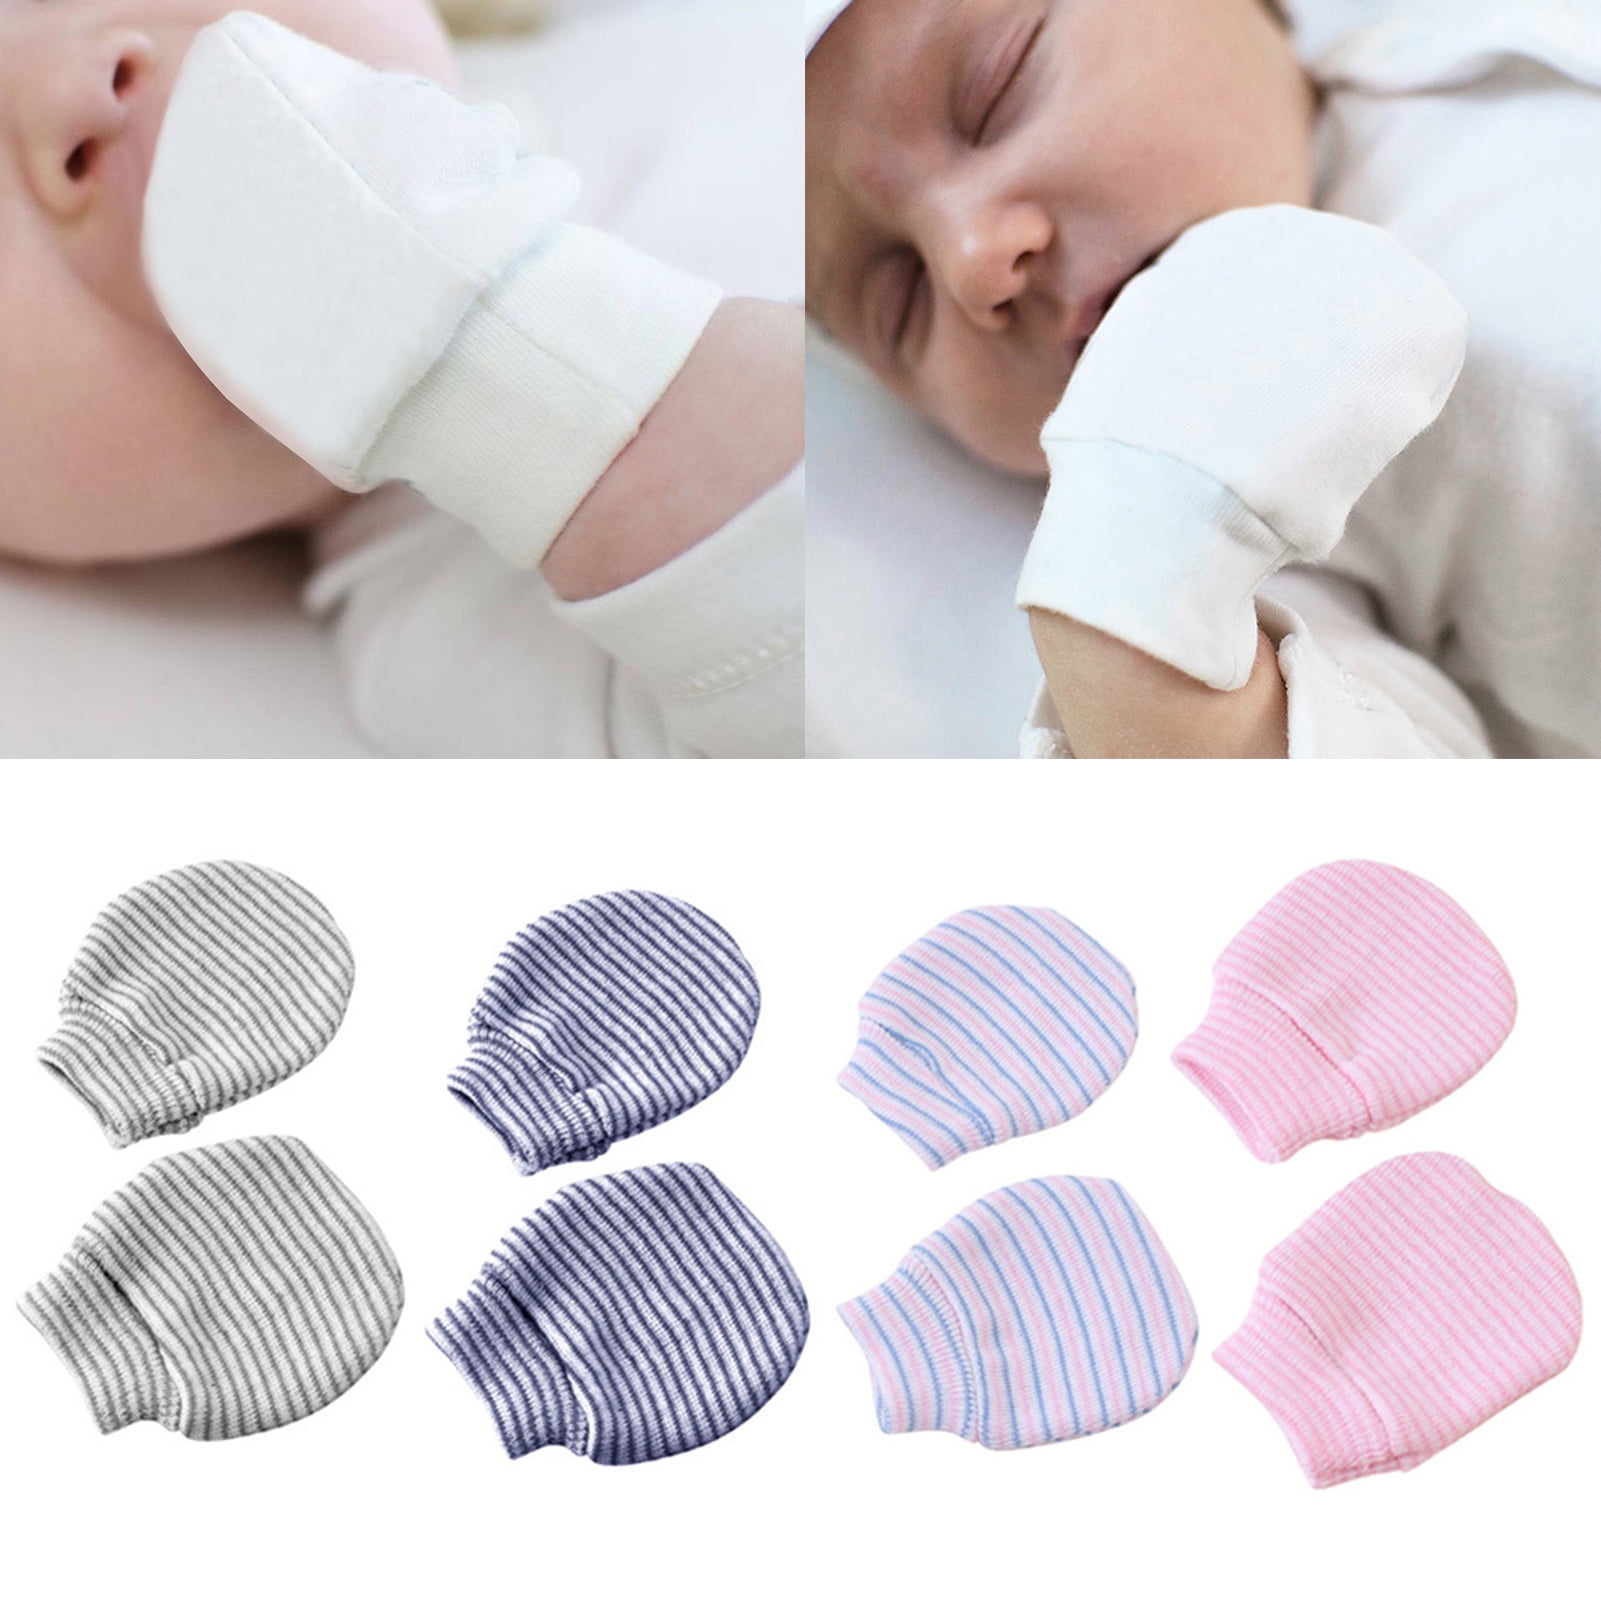 Cotton Baby Warm Gloves Mittens Anti Scratch Breathable For Infant Newborn CB 